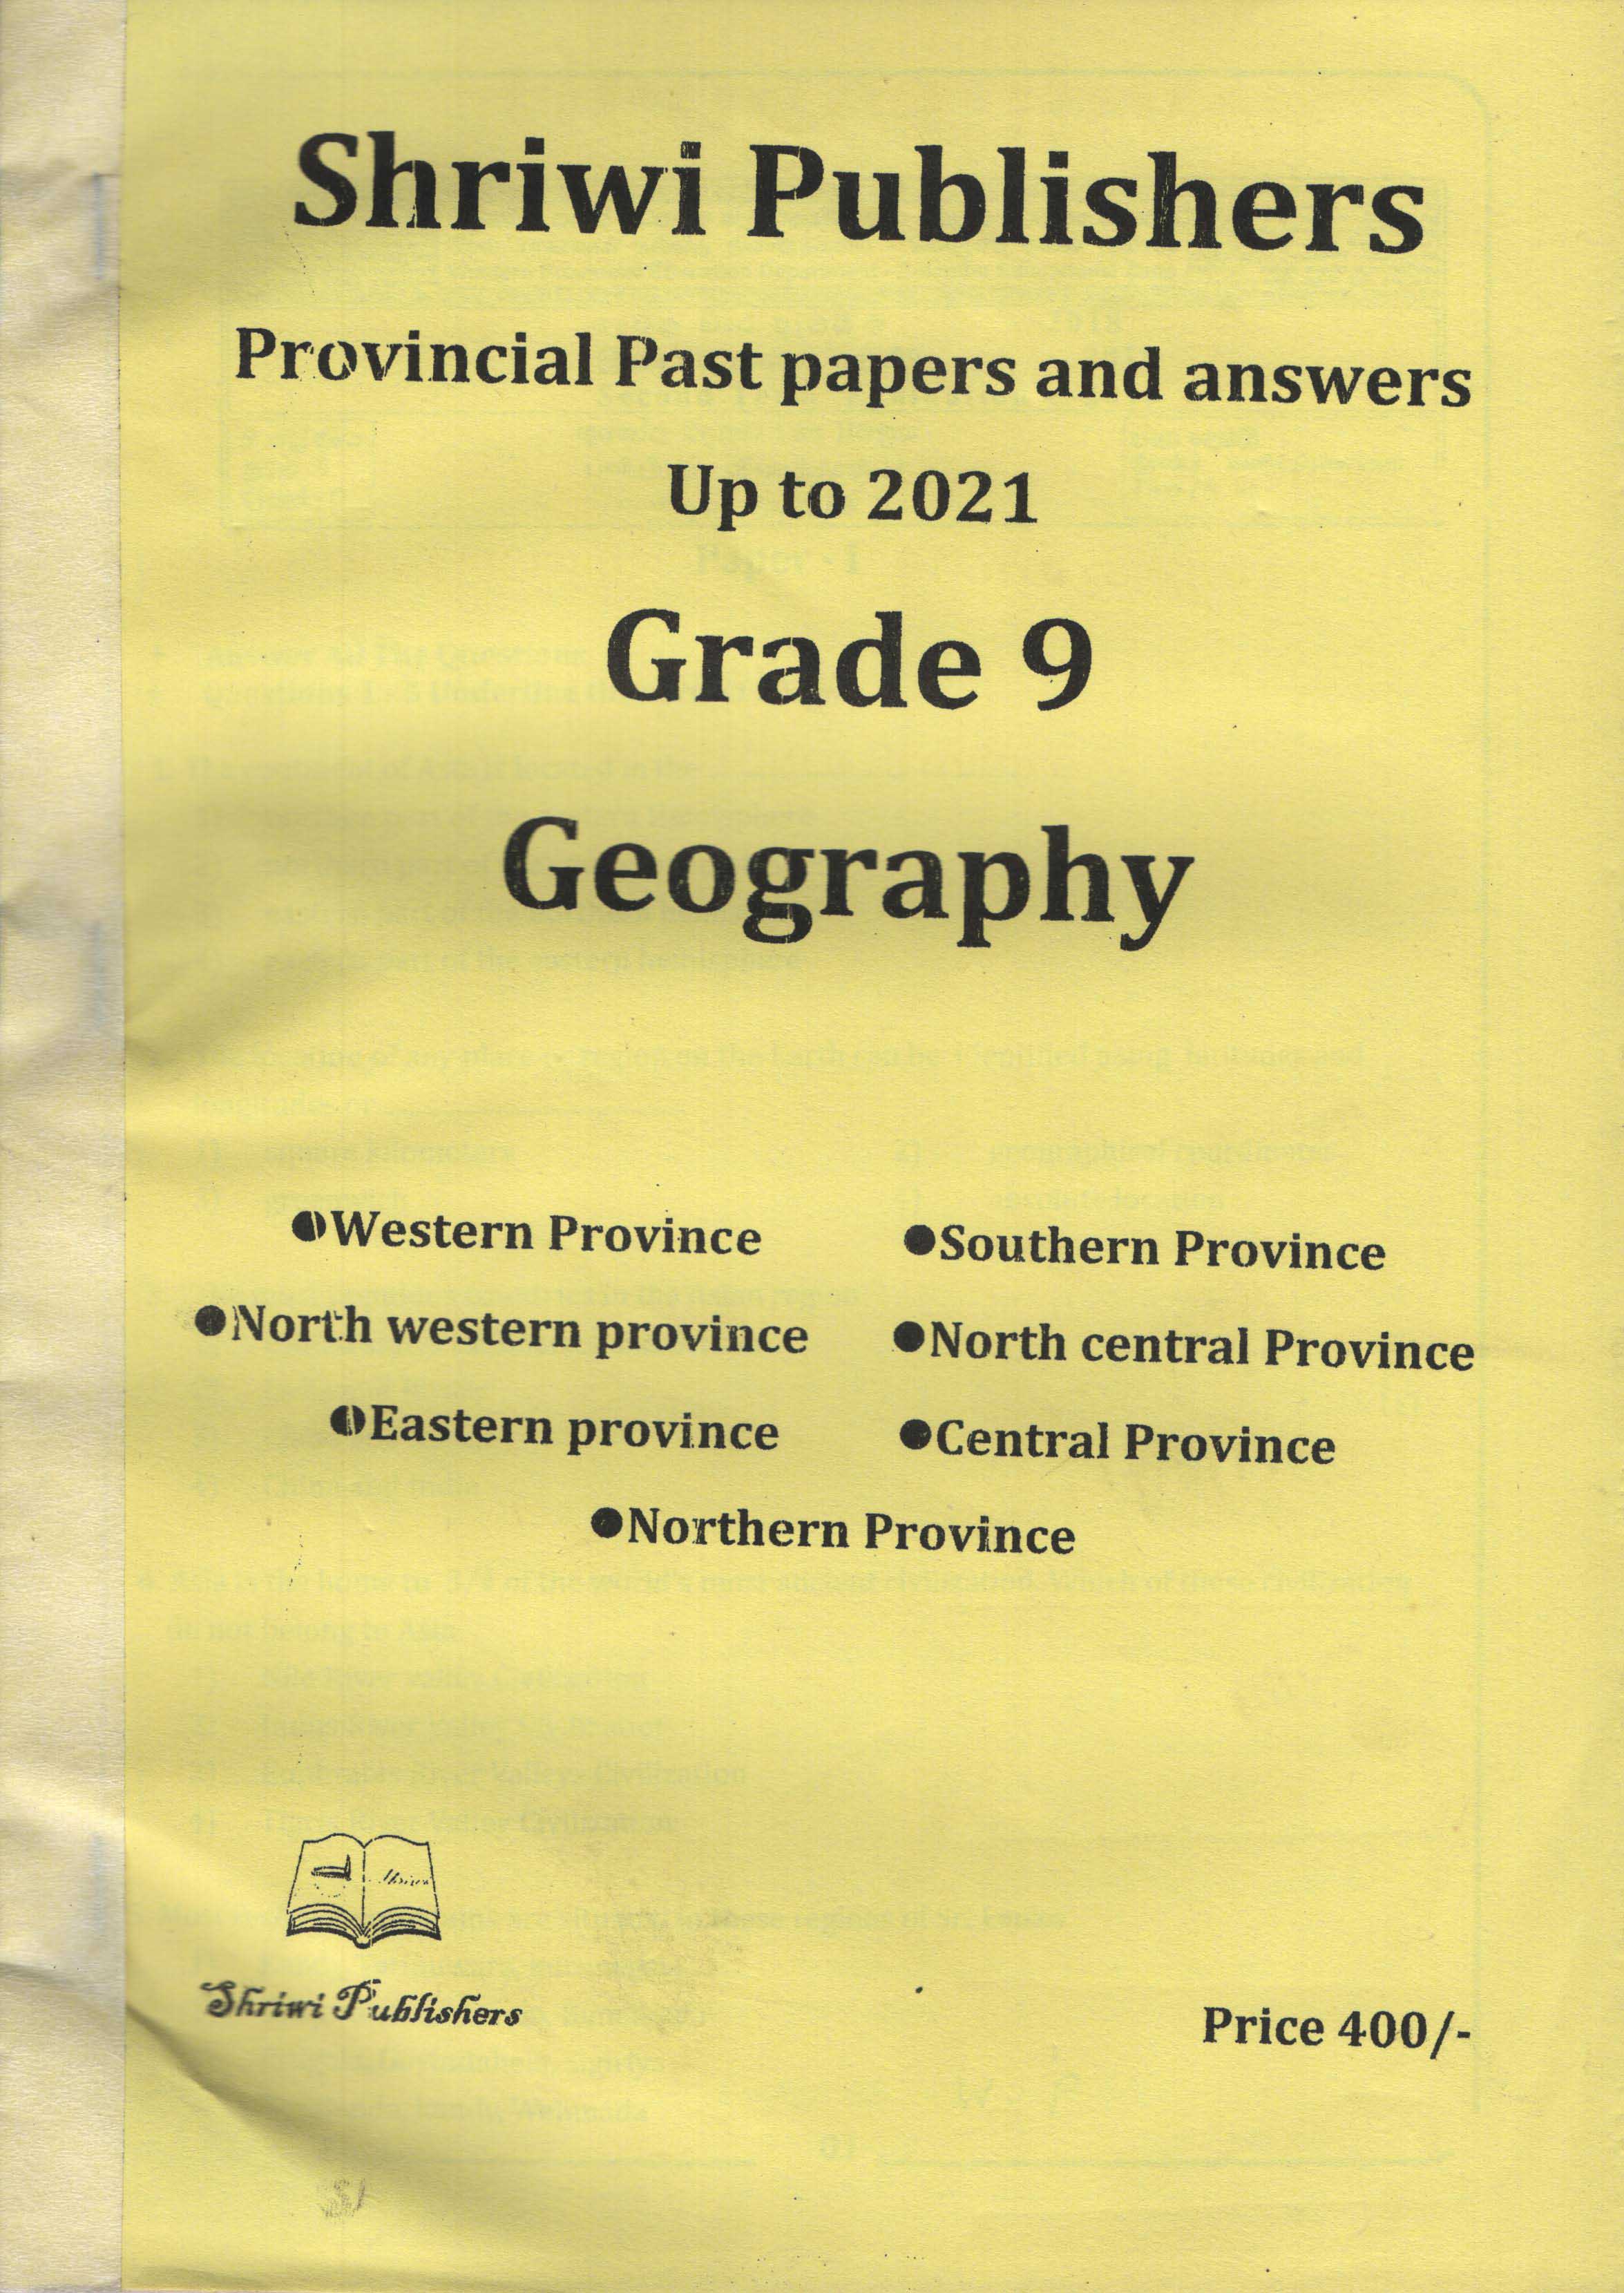 Shriwi Grade 9 Geography Provincial Past Papers and Answers up to 2021